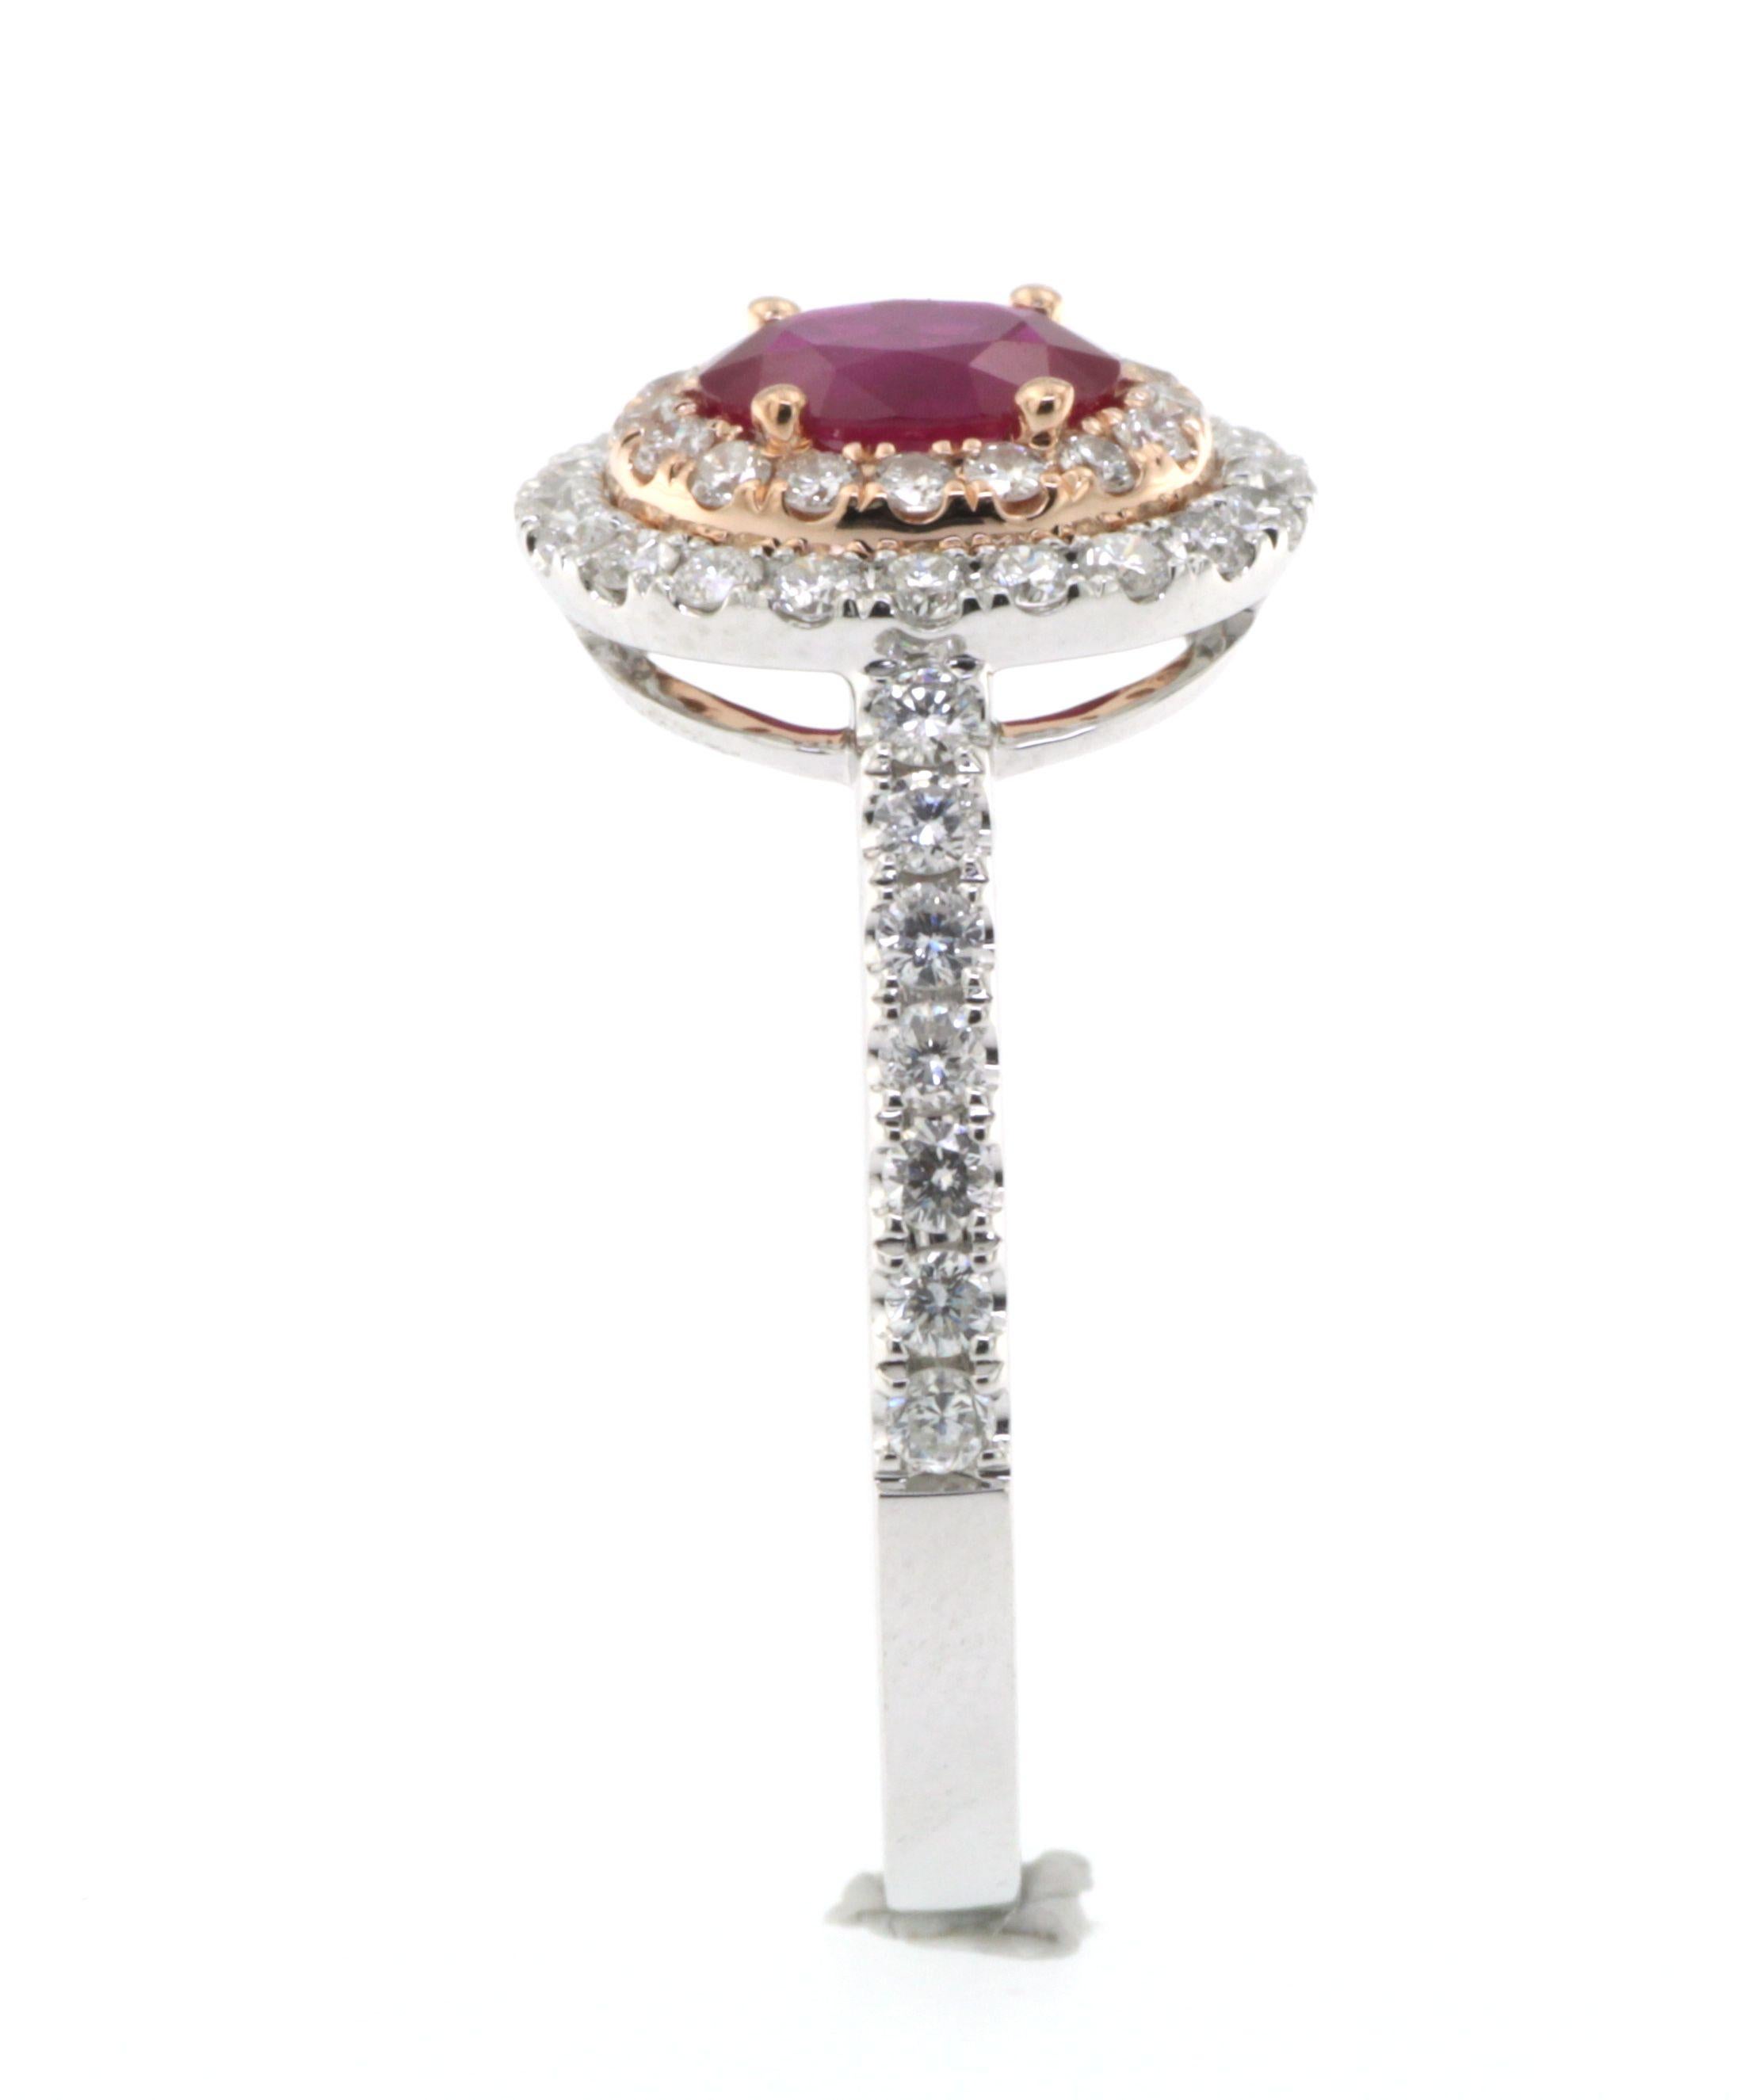 Oval Cut 0.80 Carat Ruby Diamond Double Halo Ring in 18 Karat White and Rose Gold